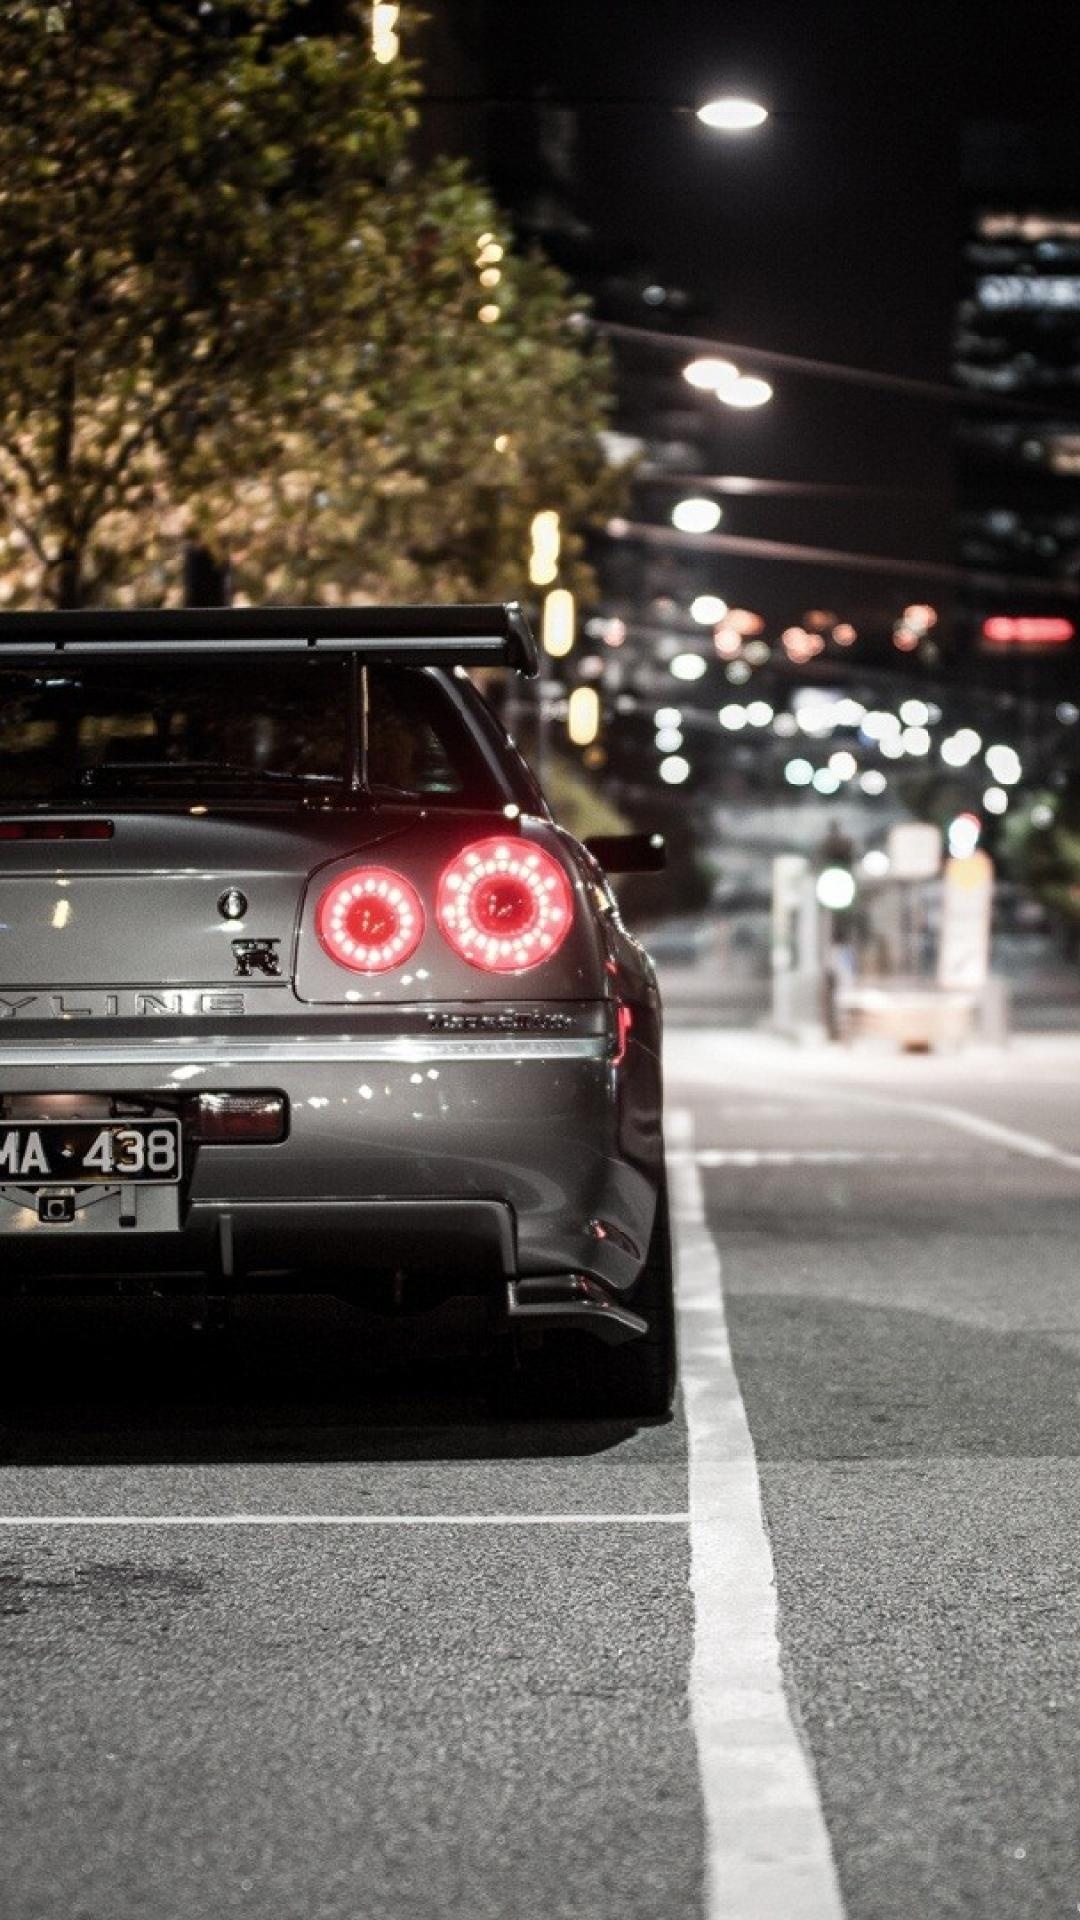 Mobile wallpapers, Nissan Skyline, Phone backgrounds, Automotive artistry, 1080x1920 Full HD Handy